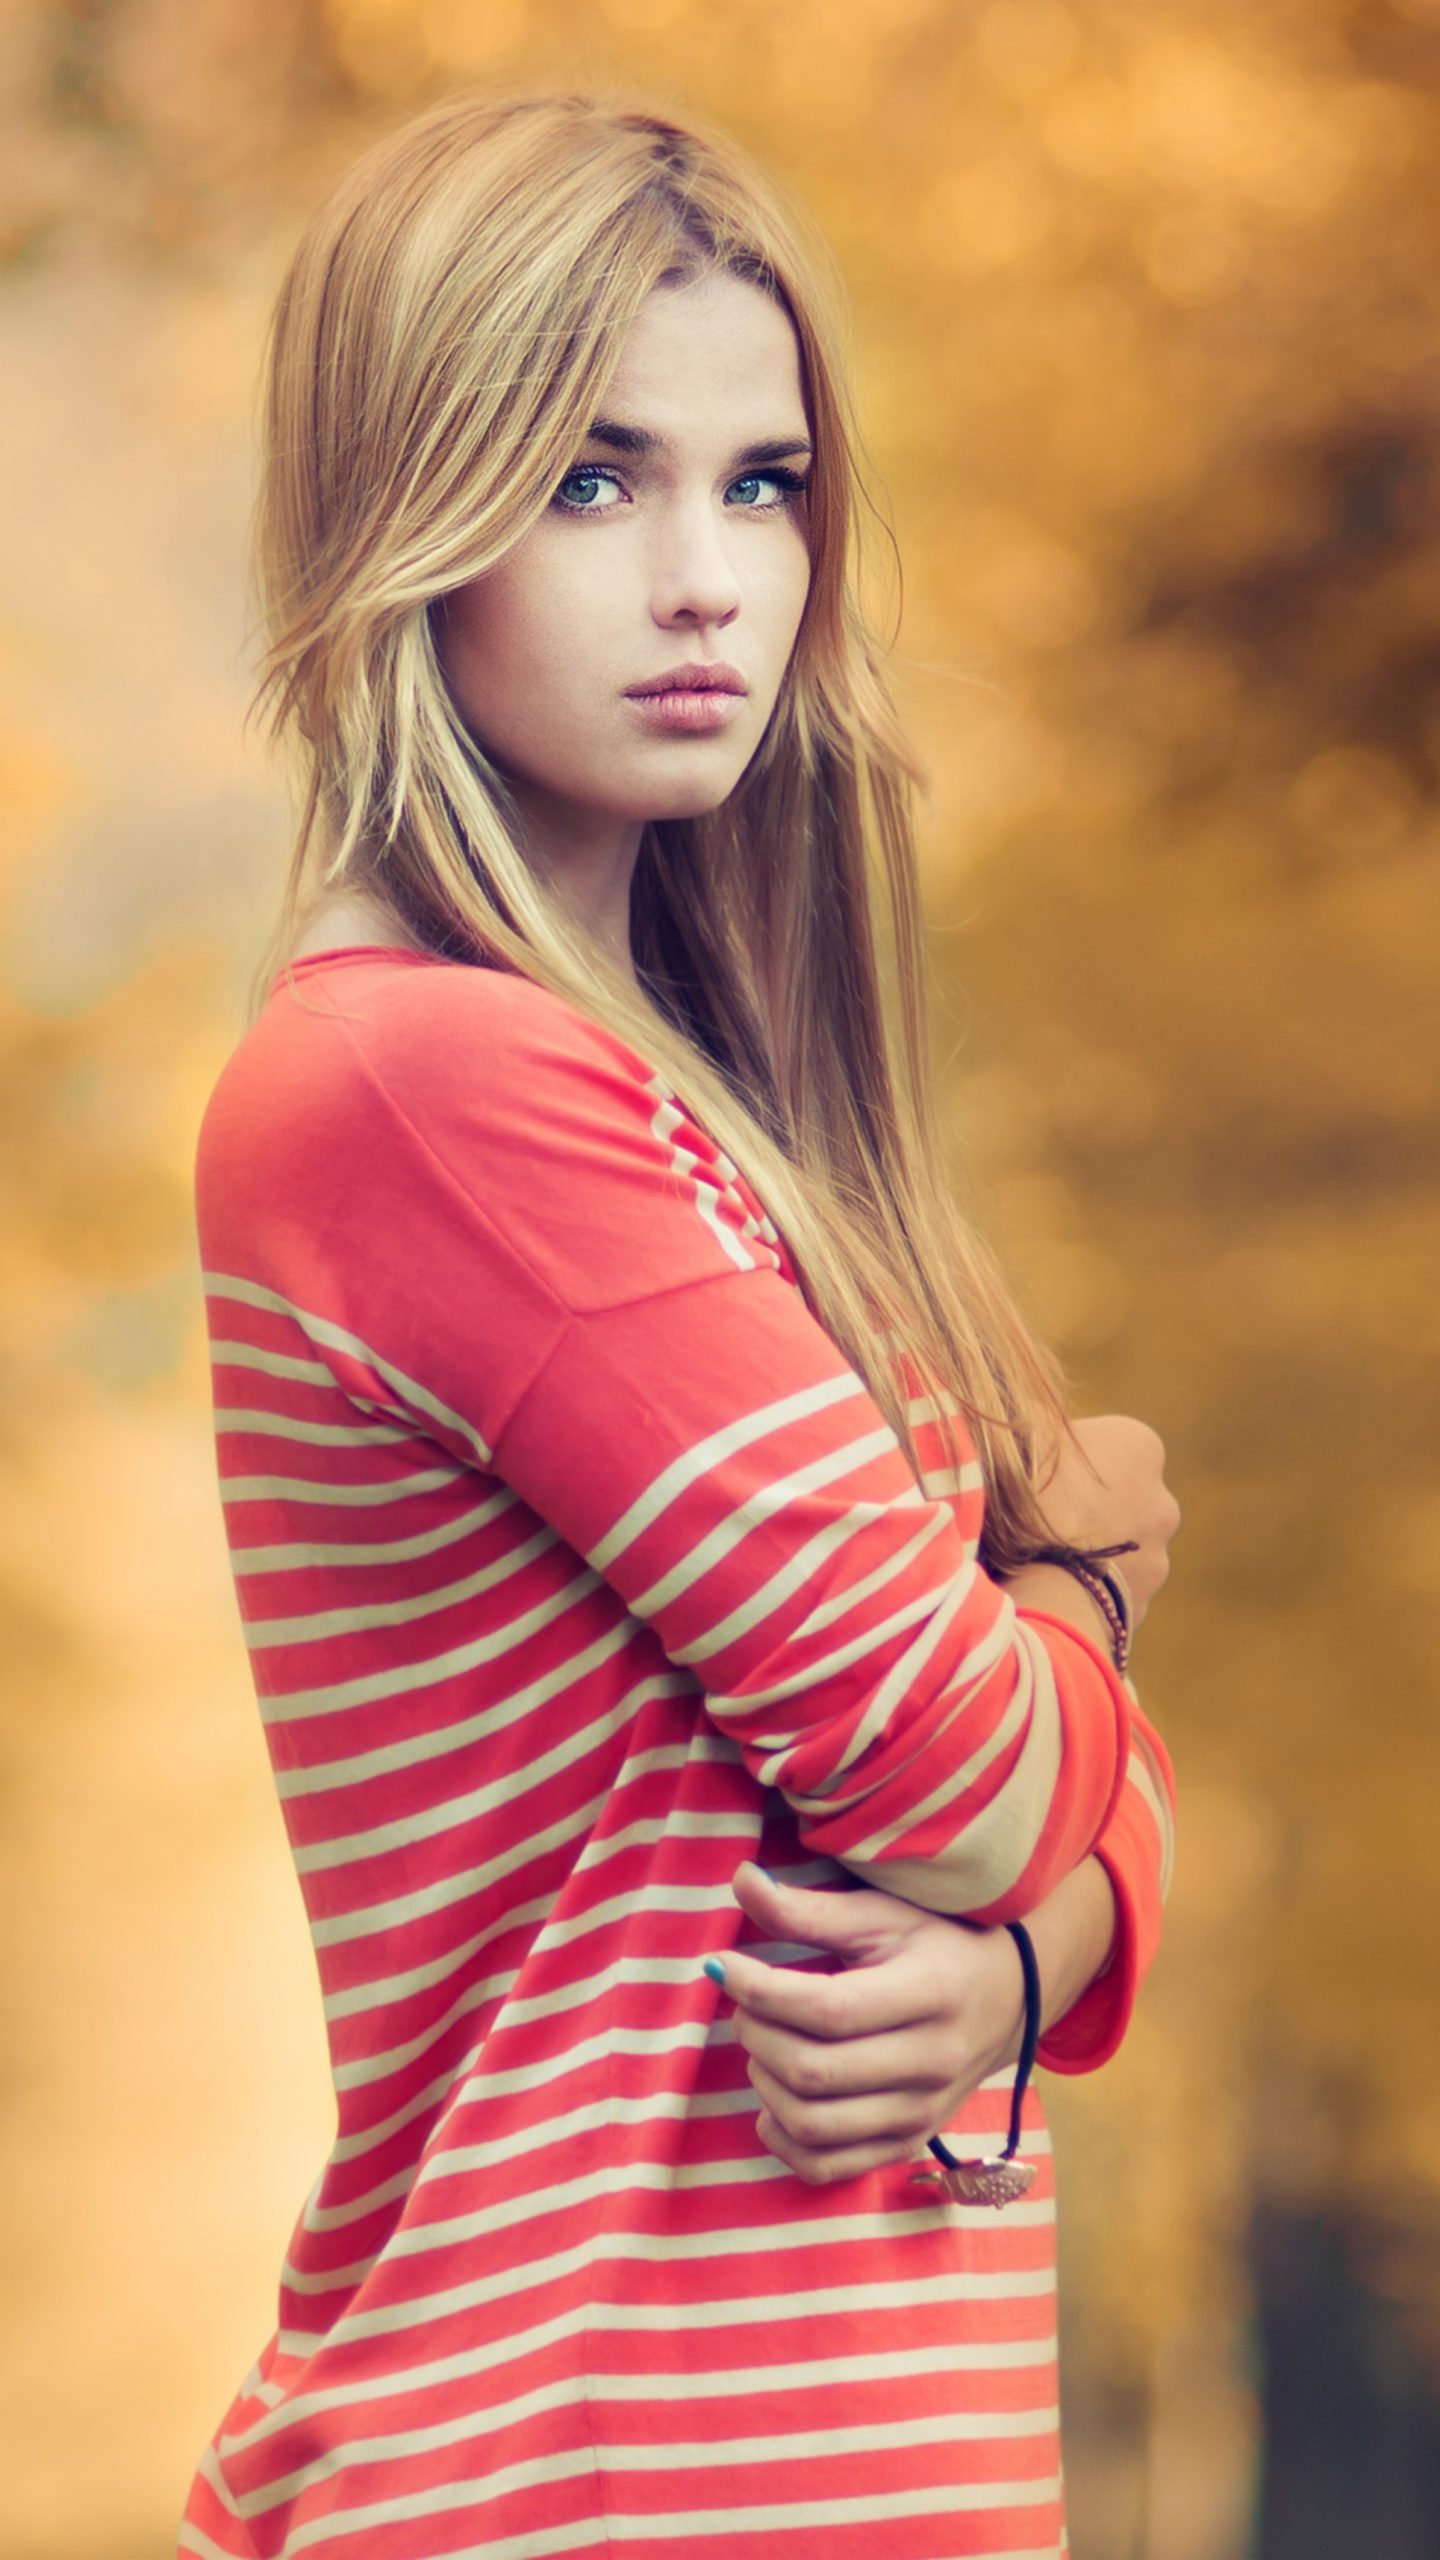 beautiful girl hd wallpapers for mobile,hair,blond,beauty,hairstyle,lip